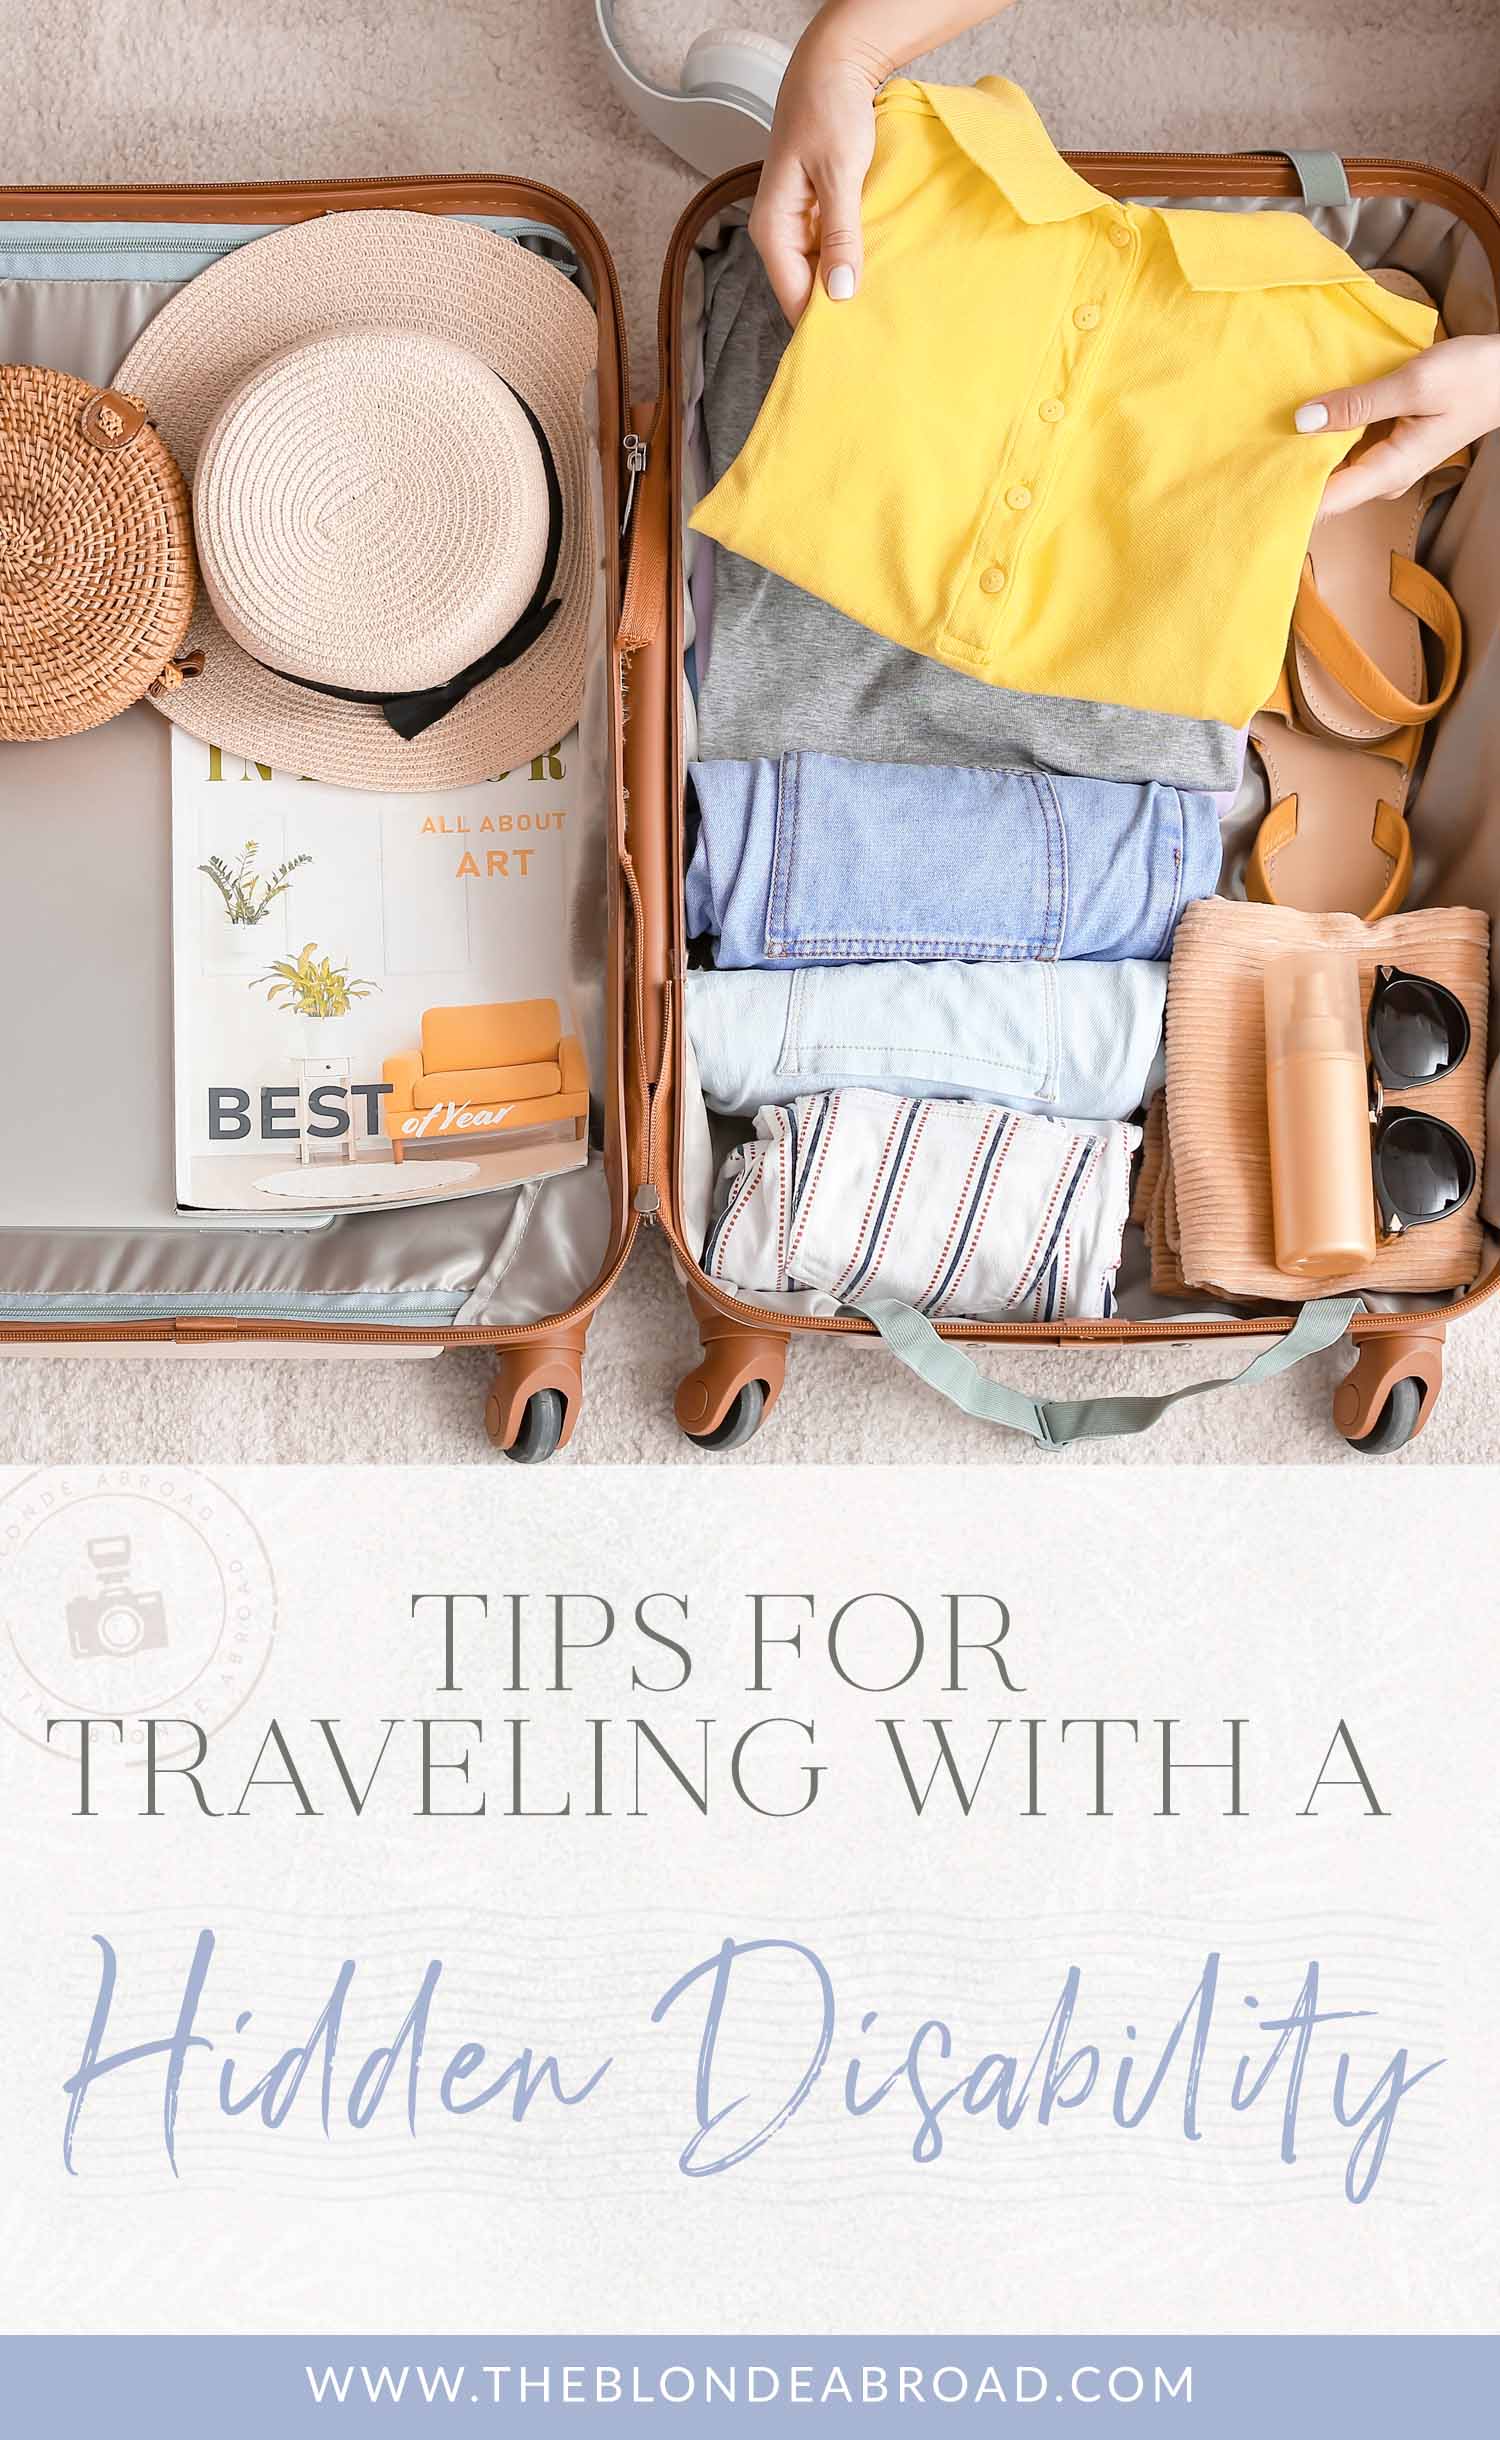 Tips for Traveling Hidden Disability